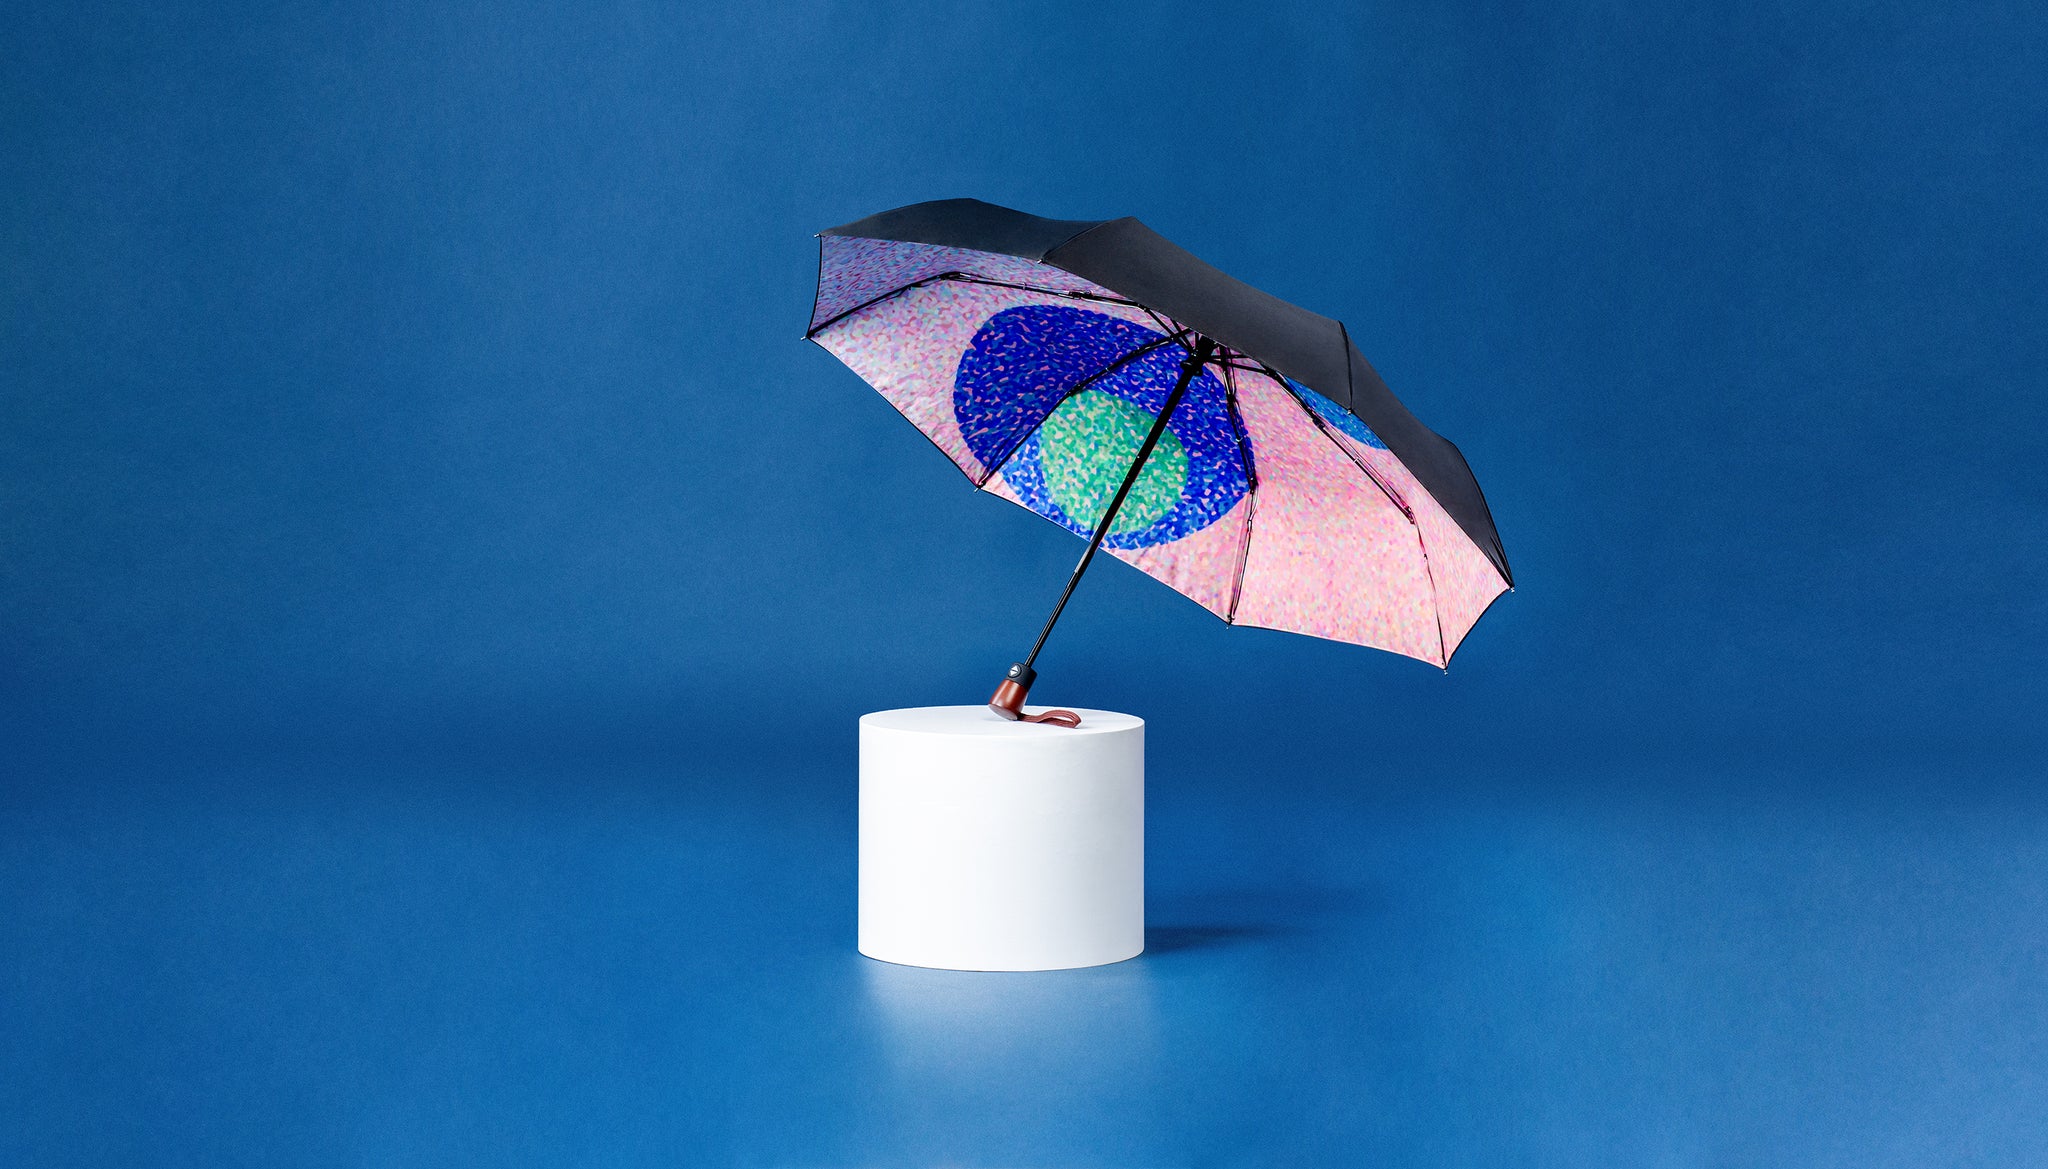 Premium Art Umbrella from Sweden / Design paraply från Stockholm / online product available / free delivery / DOTS - compact Art Umbrella, present box - zontjkdesign